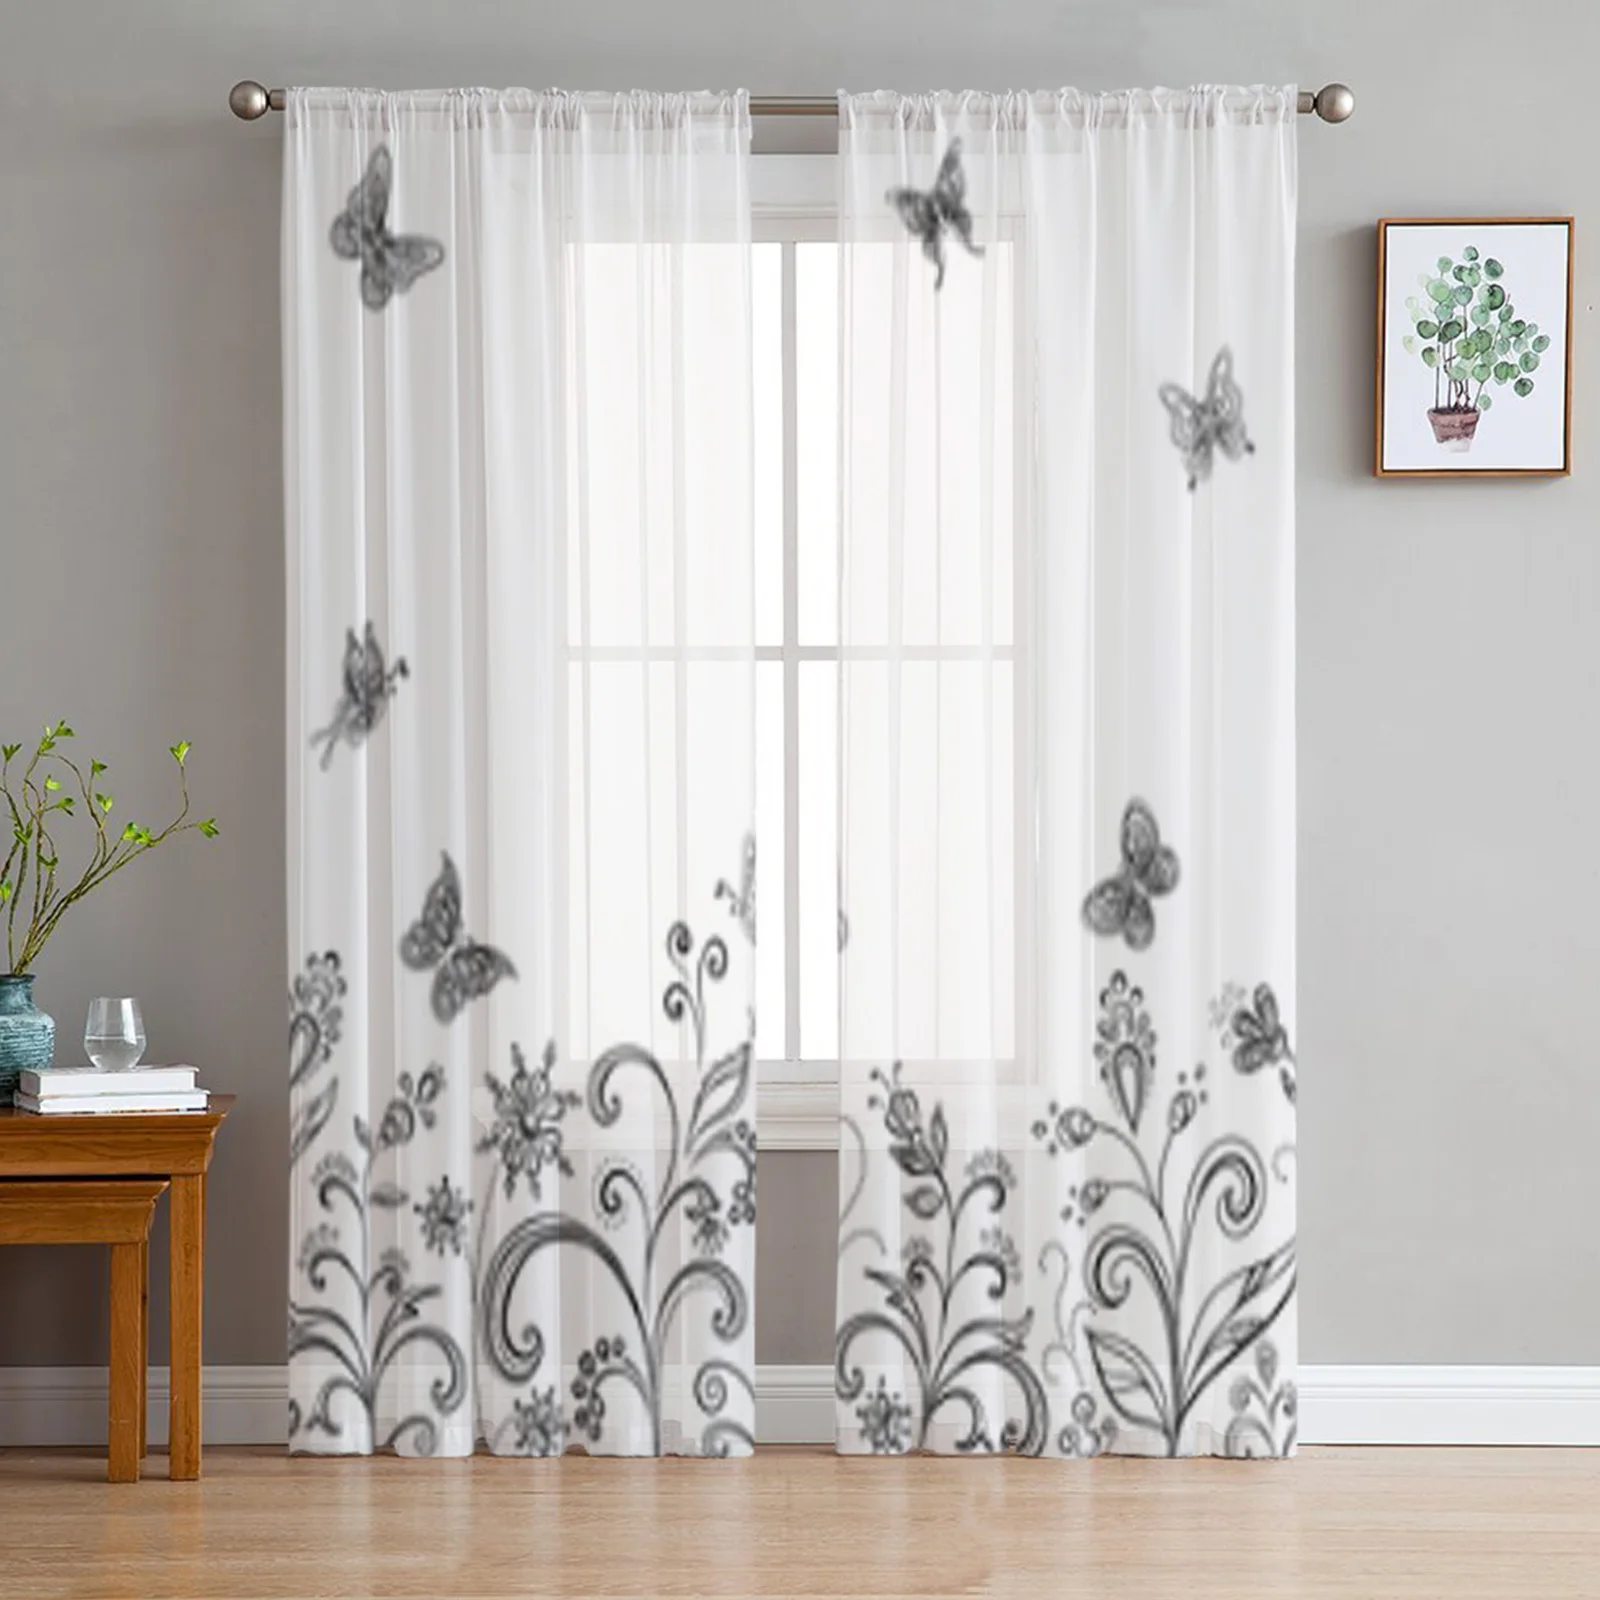 

Abstract Floral And Butterflies Sheer Curtains For Living Room Window Transparent Voile Tulle Curtain Bedroom Drapes Home Decor